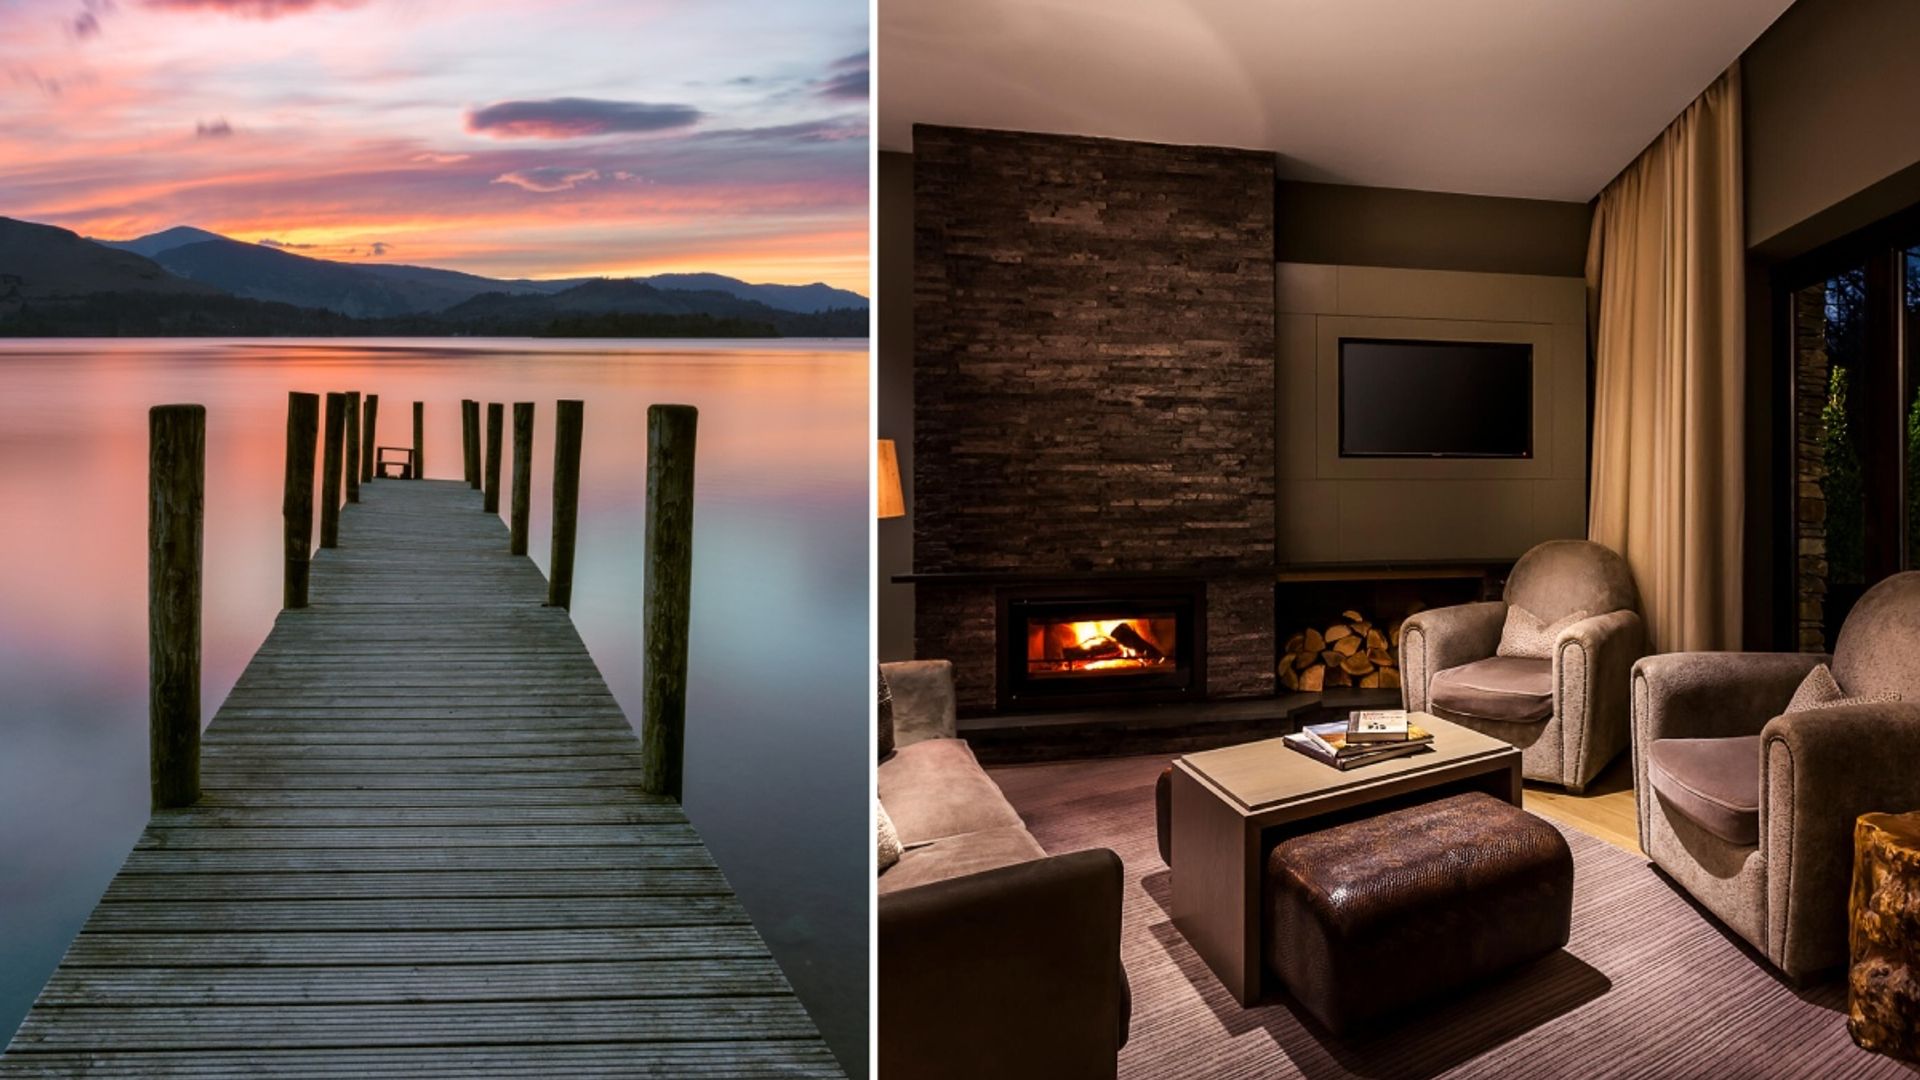 The Lake District is the perfect spot for a cosy staycation - here's why